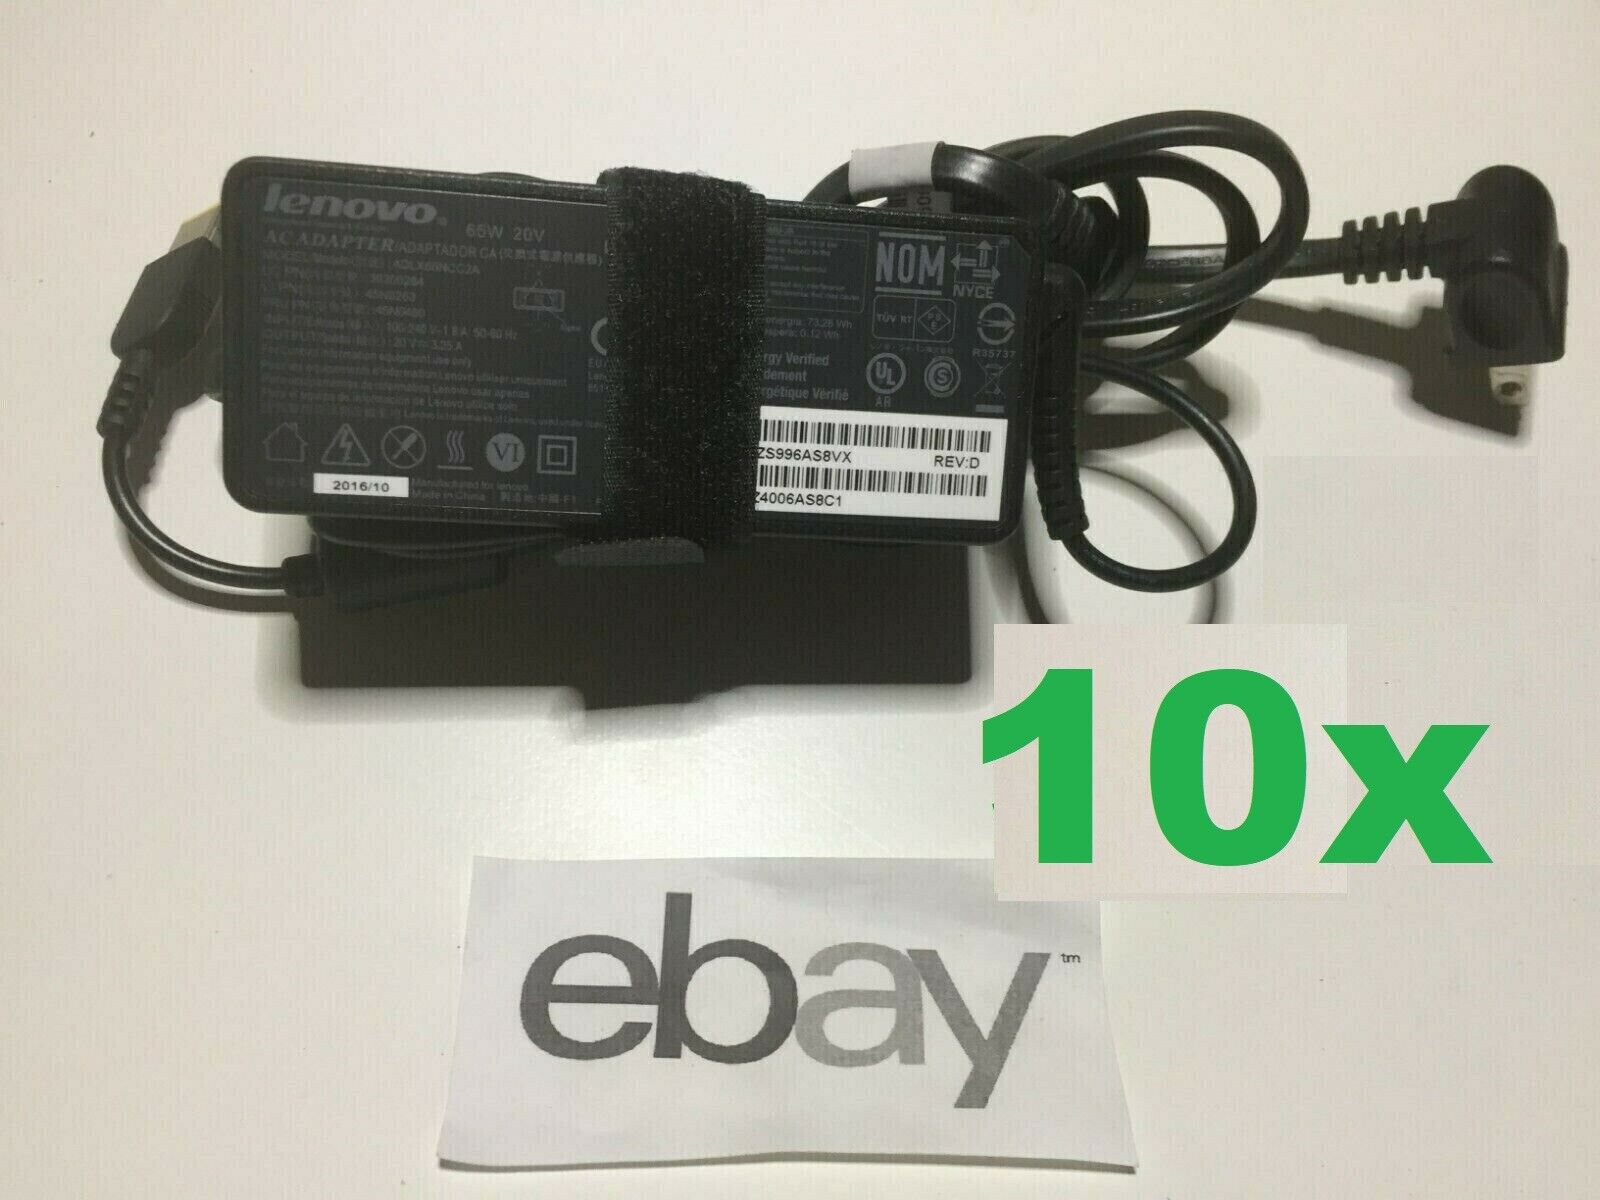 Lot of 10 Genuine Lenovo 65W 20V 3.25A Power Adapter w/ Cables SQUARE TIP